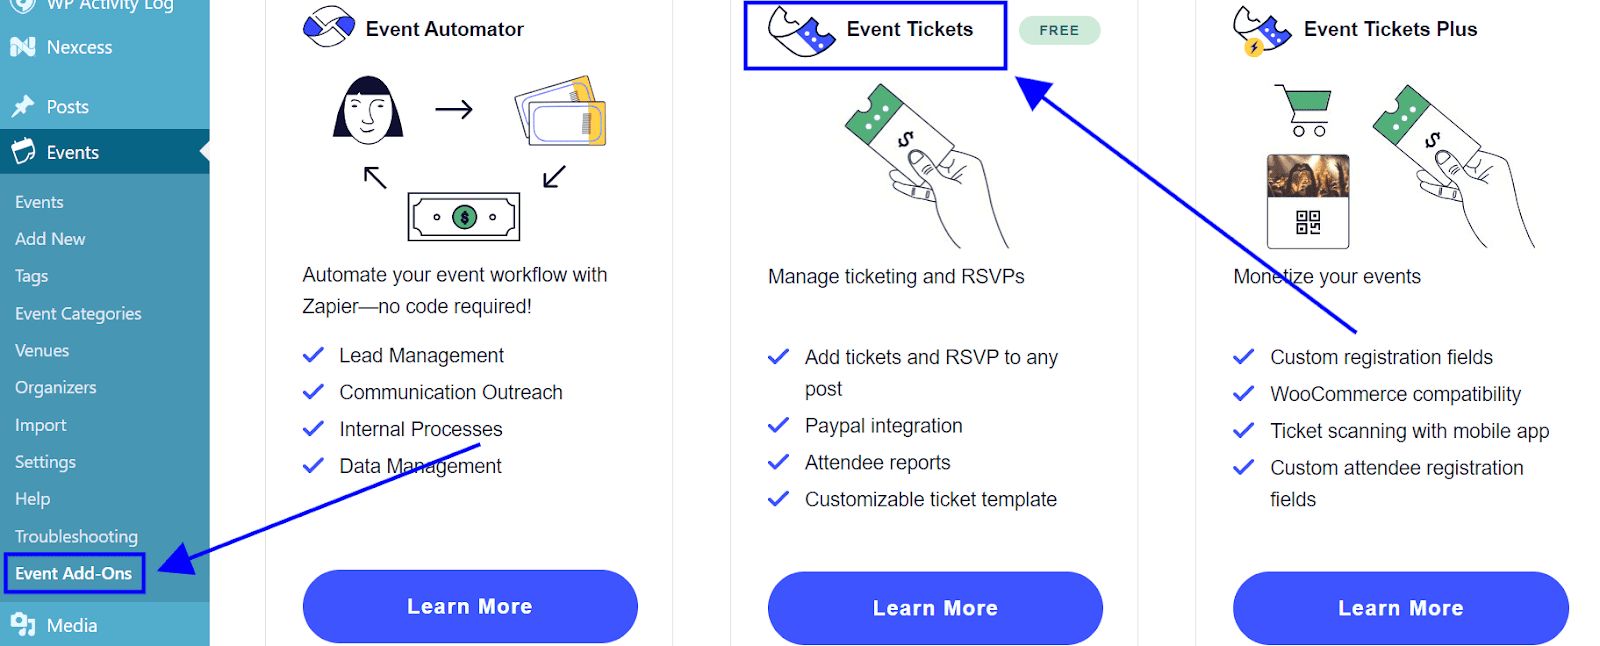 How to download the Event Tickets add-on.